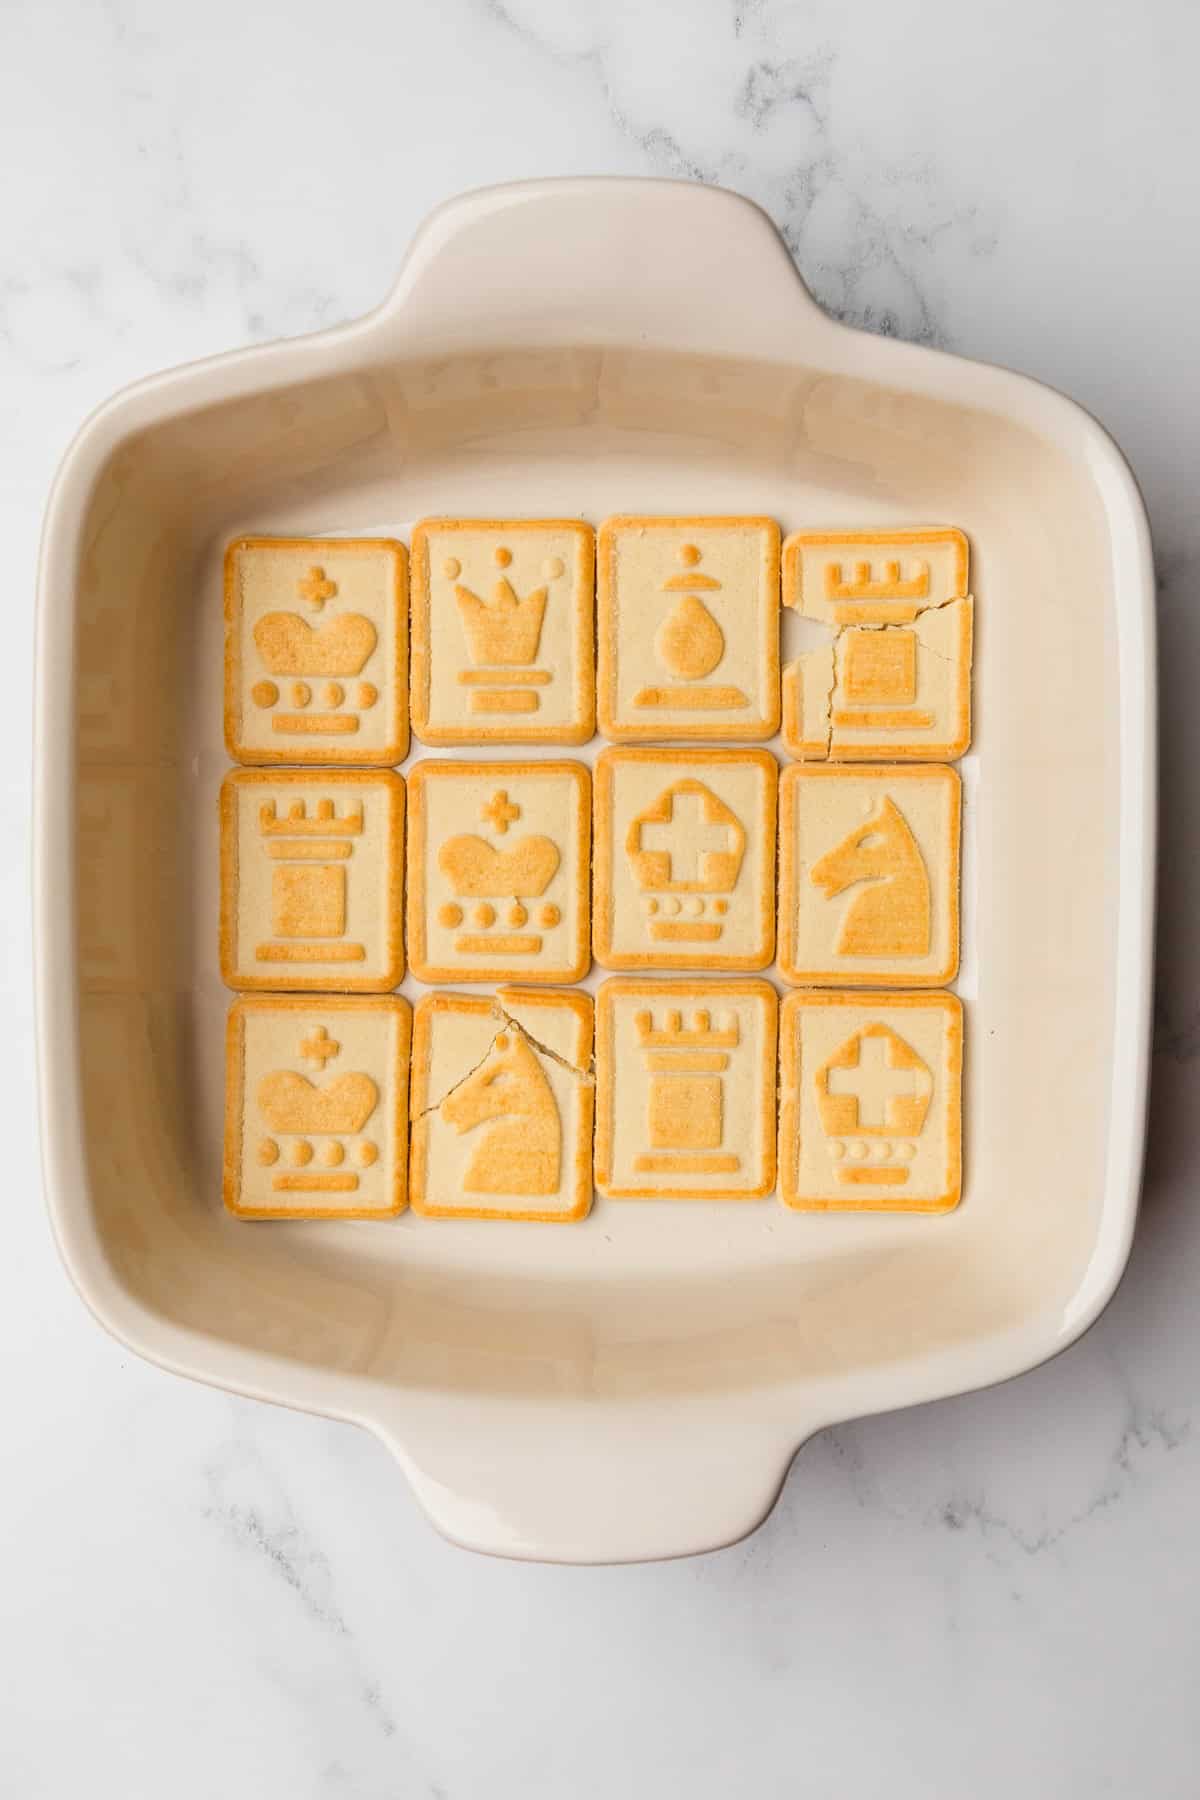 Chessman cookies lining the bottom of a baking dish.